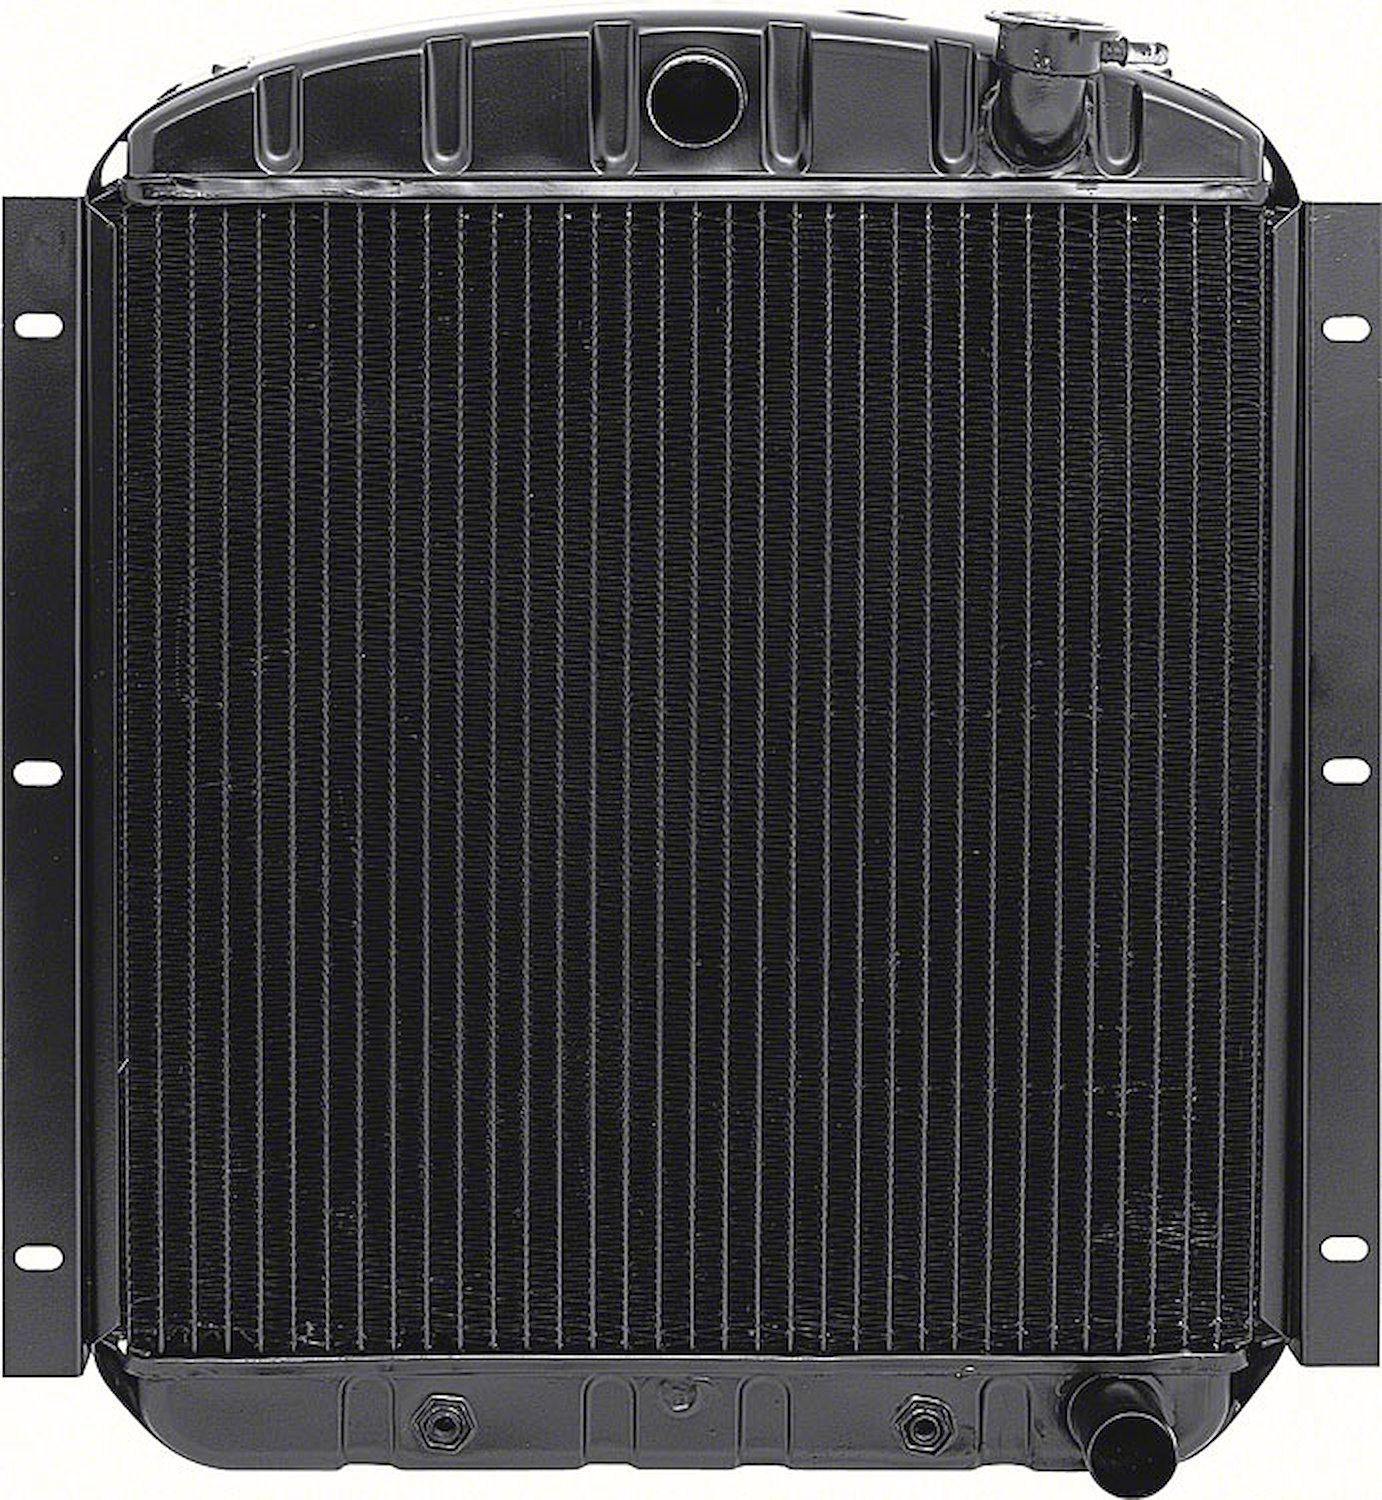 CRD9802A Radiator 1955-59 GMC 1/2 Ton L6/V8 With AT 4 Row Copper/Brass (19-7/8" x 21-3/8" x 2-5/8" Core)